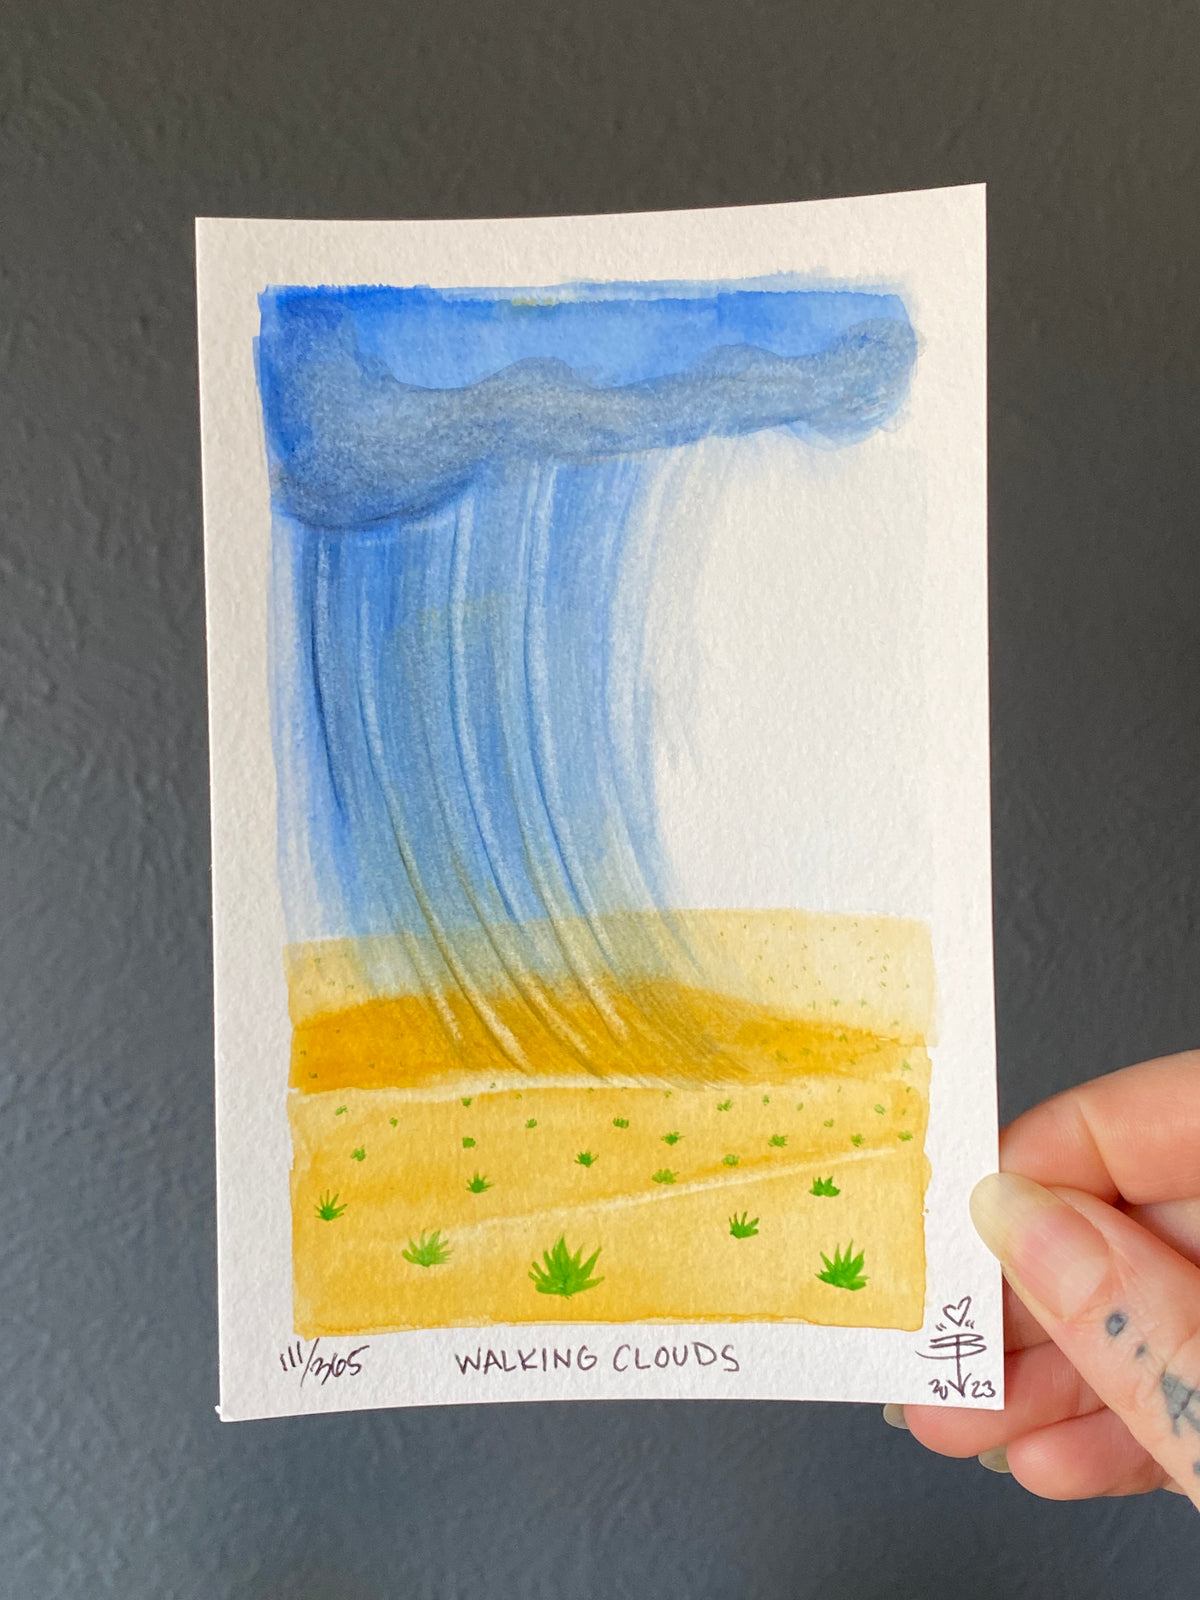 111/365 &quot;Walking Clouds&quot; - 4x6 Gouache and Ink